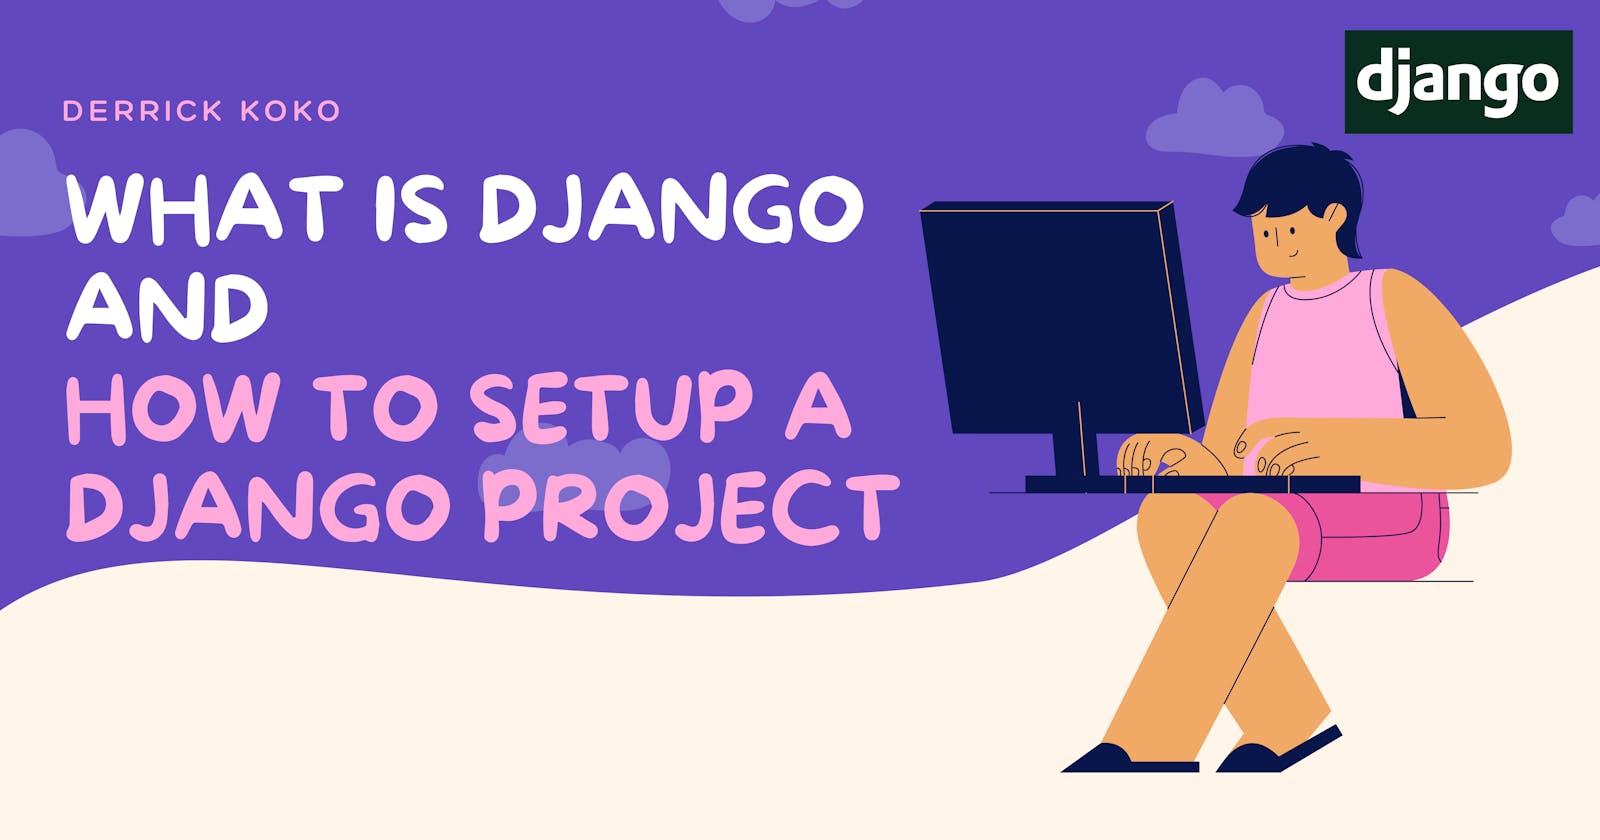 What is Django and how to set up a Django project?